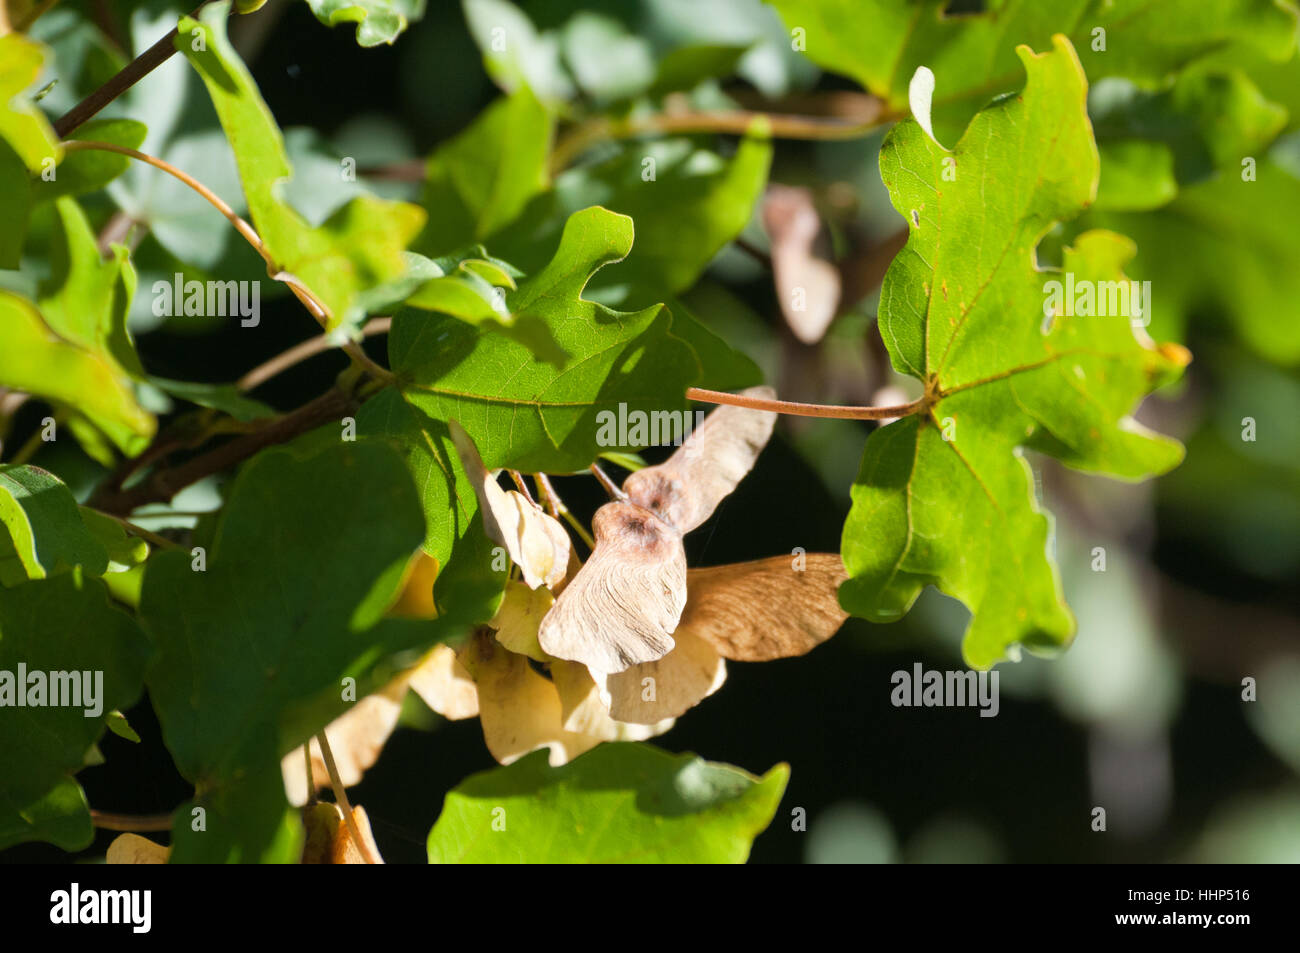 Field Maple (Acer campestre) leaves and winged seeds Stock Photo